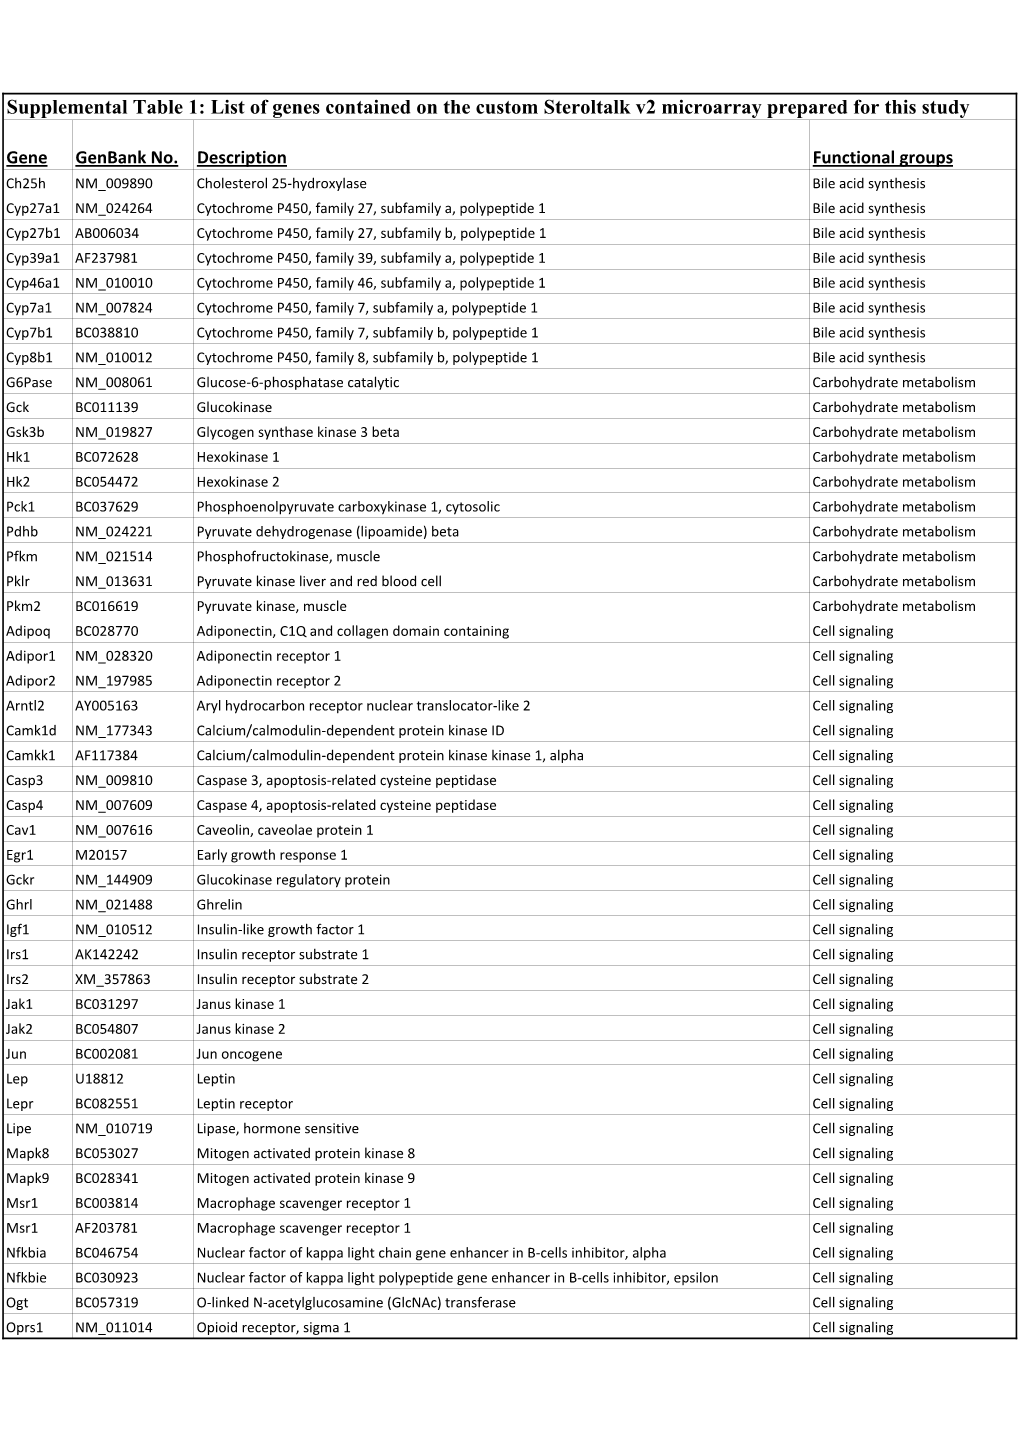 Supplemental Table 1: List of Genes Contained on the Custom Steroltalk V2 Microarray Prepared for This Study